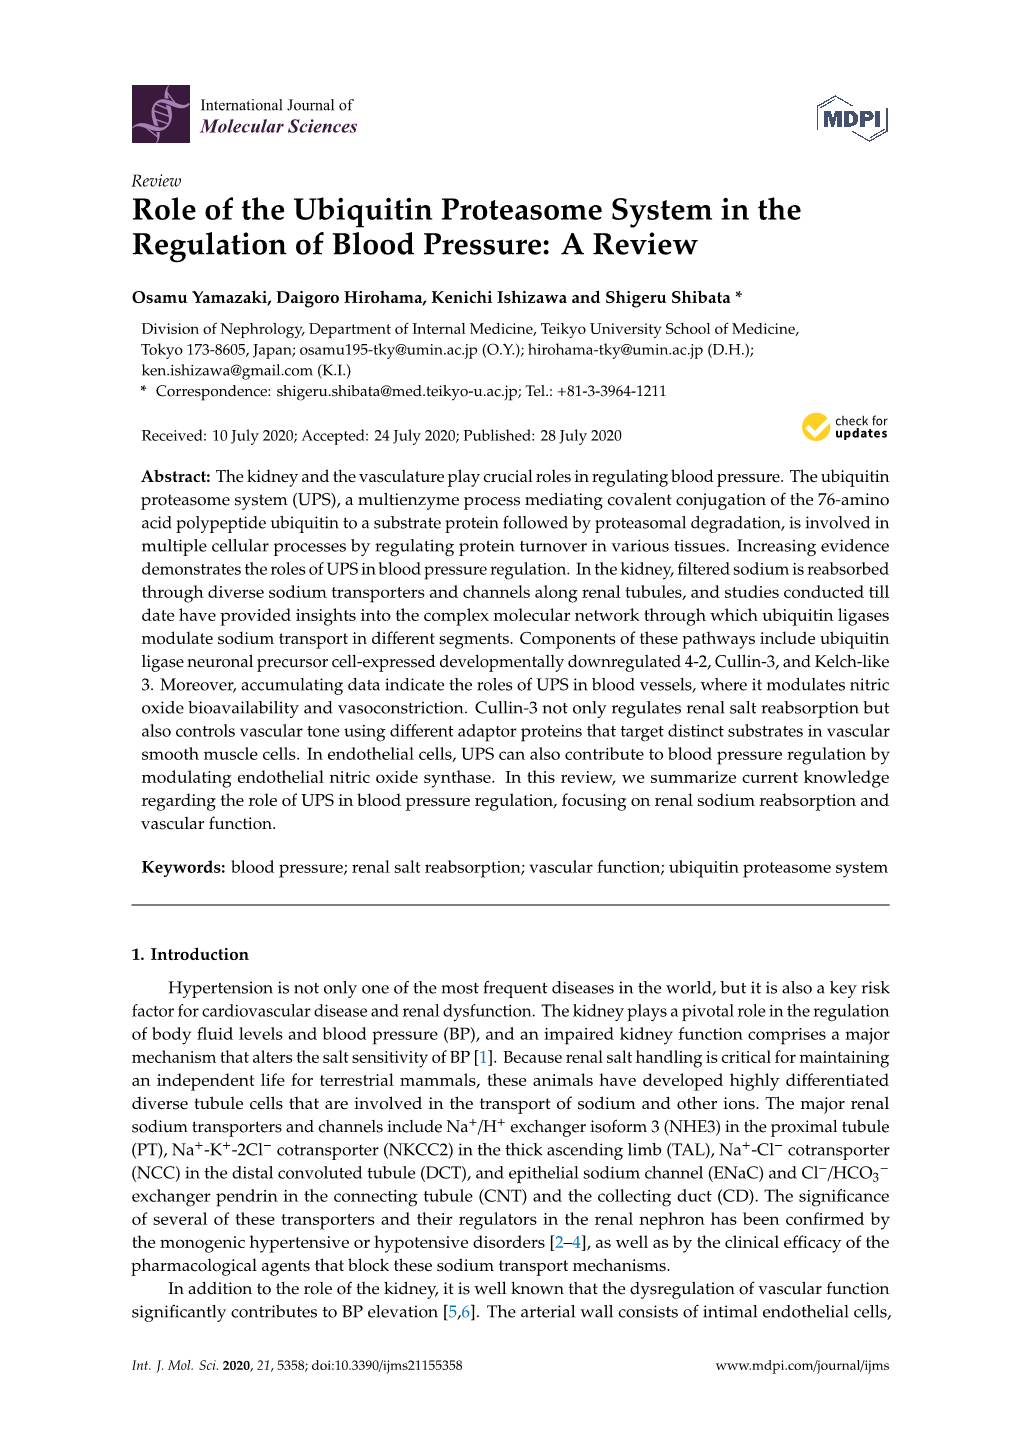 Role of the Ubiquitin Proteasome System in the Regulation of Blood Pressure: a Review